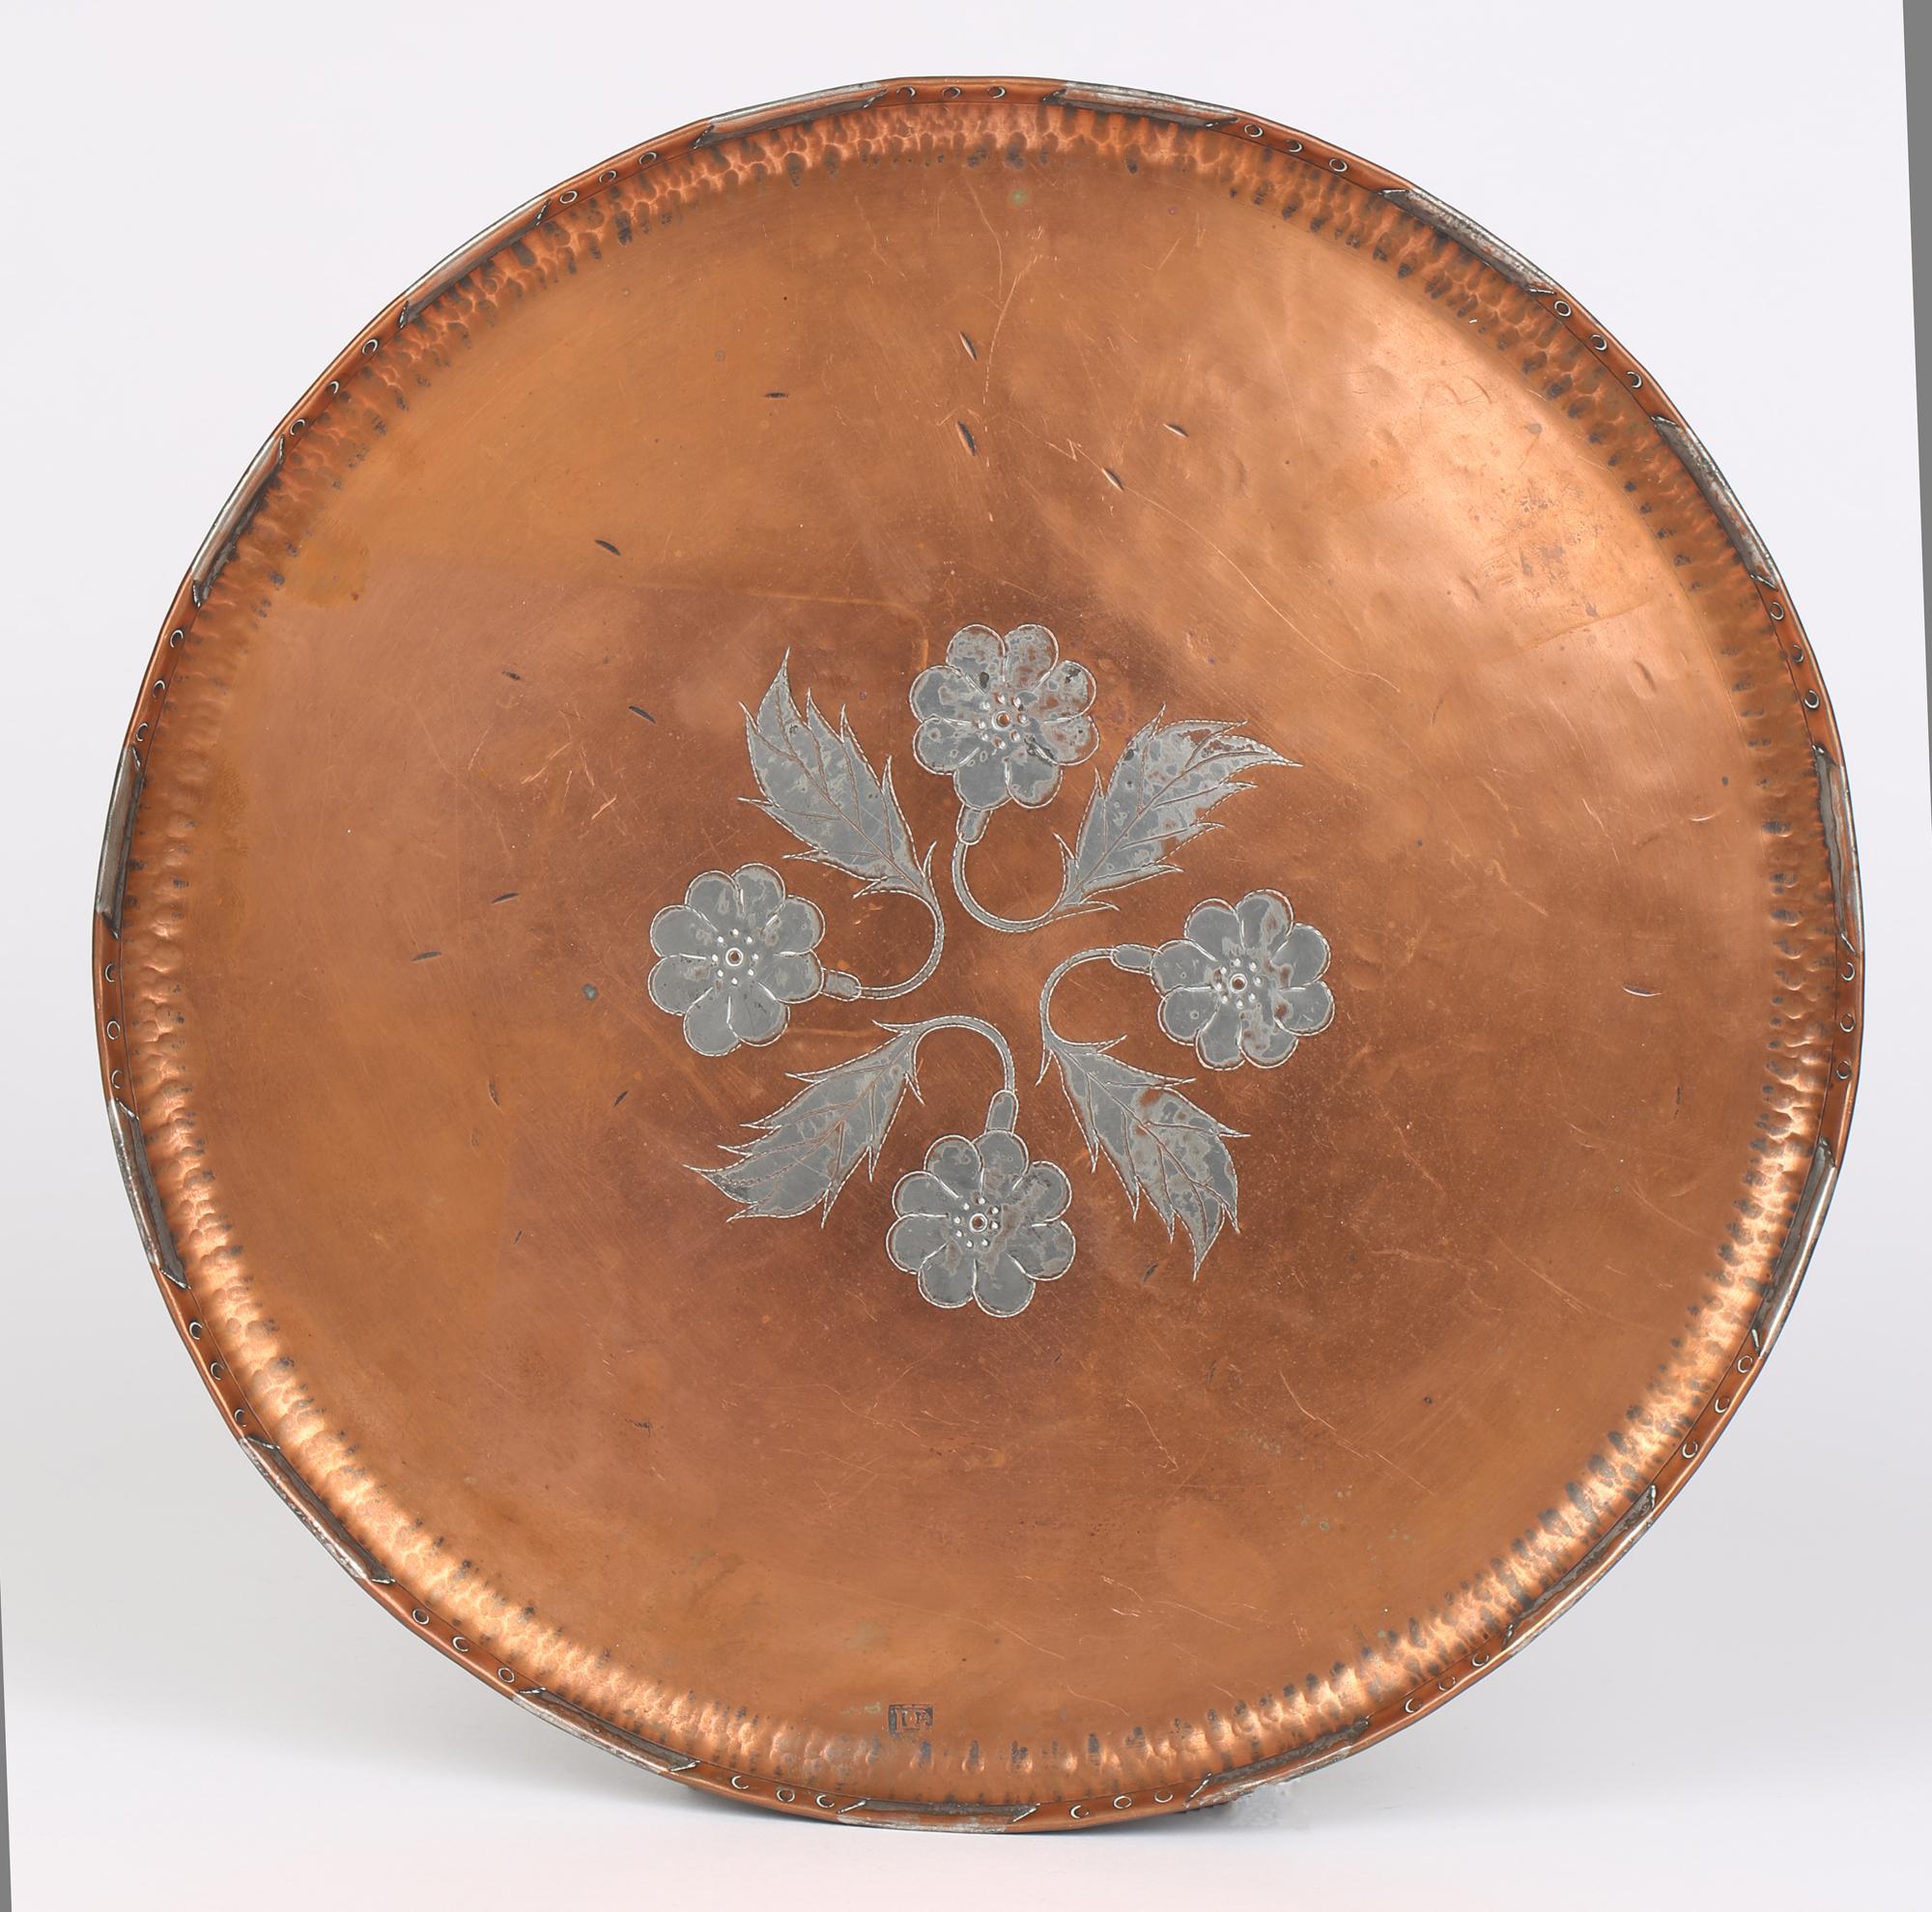 Hand-Crafted Arts & Crafts Inlaid Floral Design Copper Tray Hugh Wallis Style Signed PG